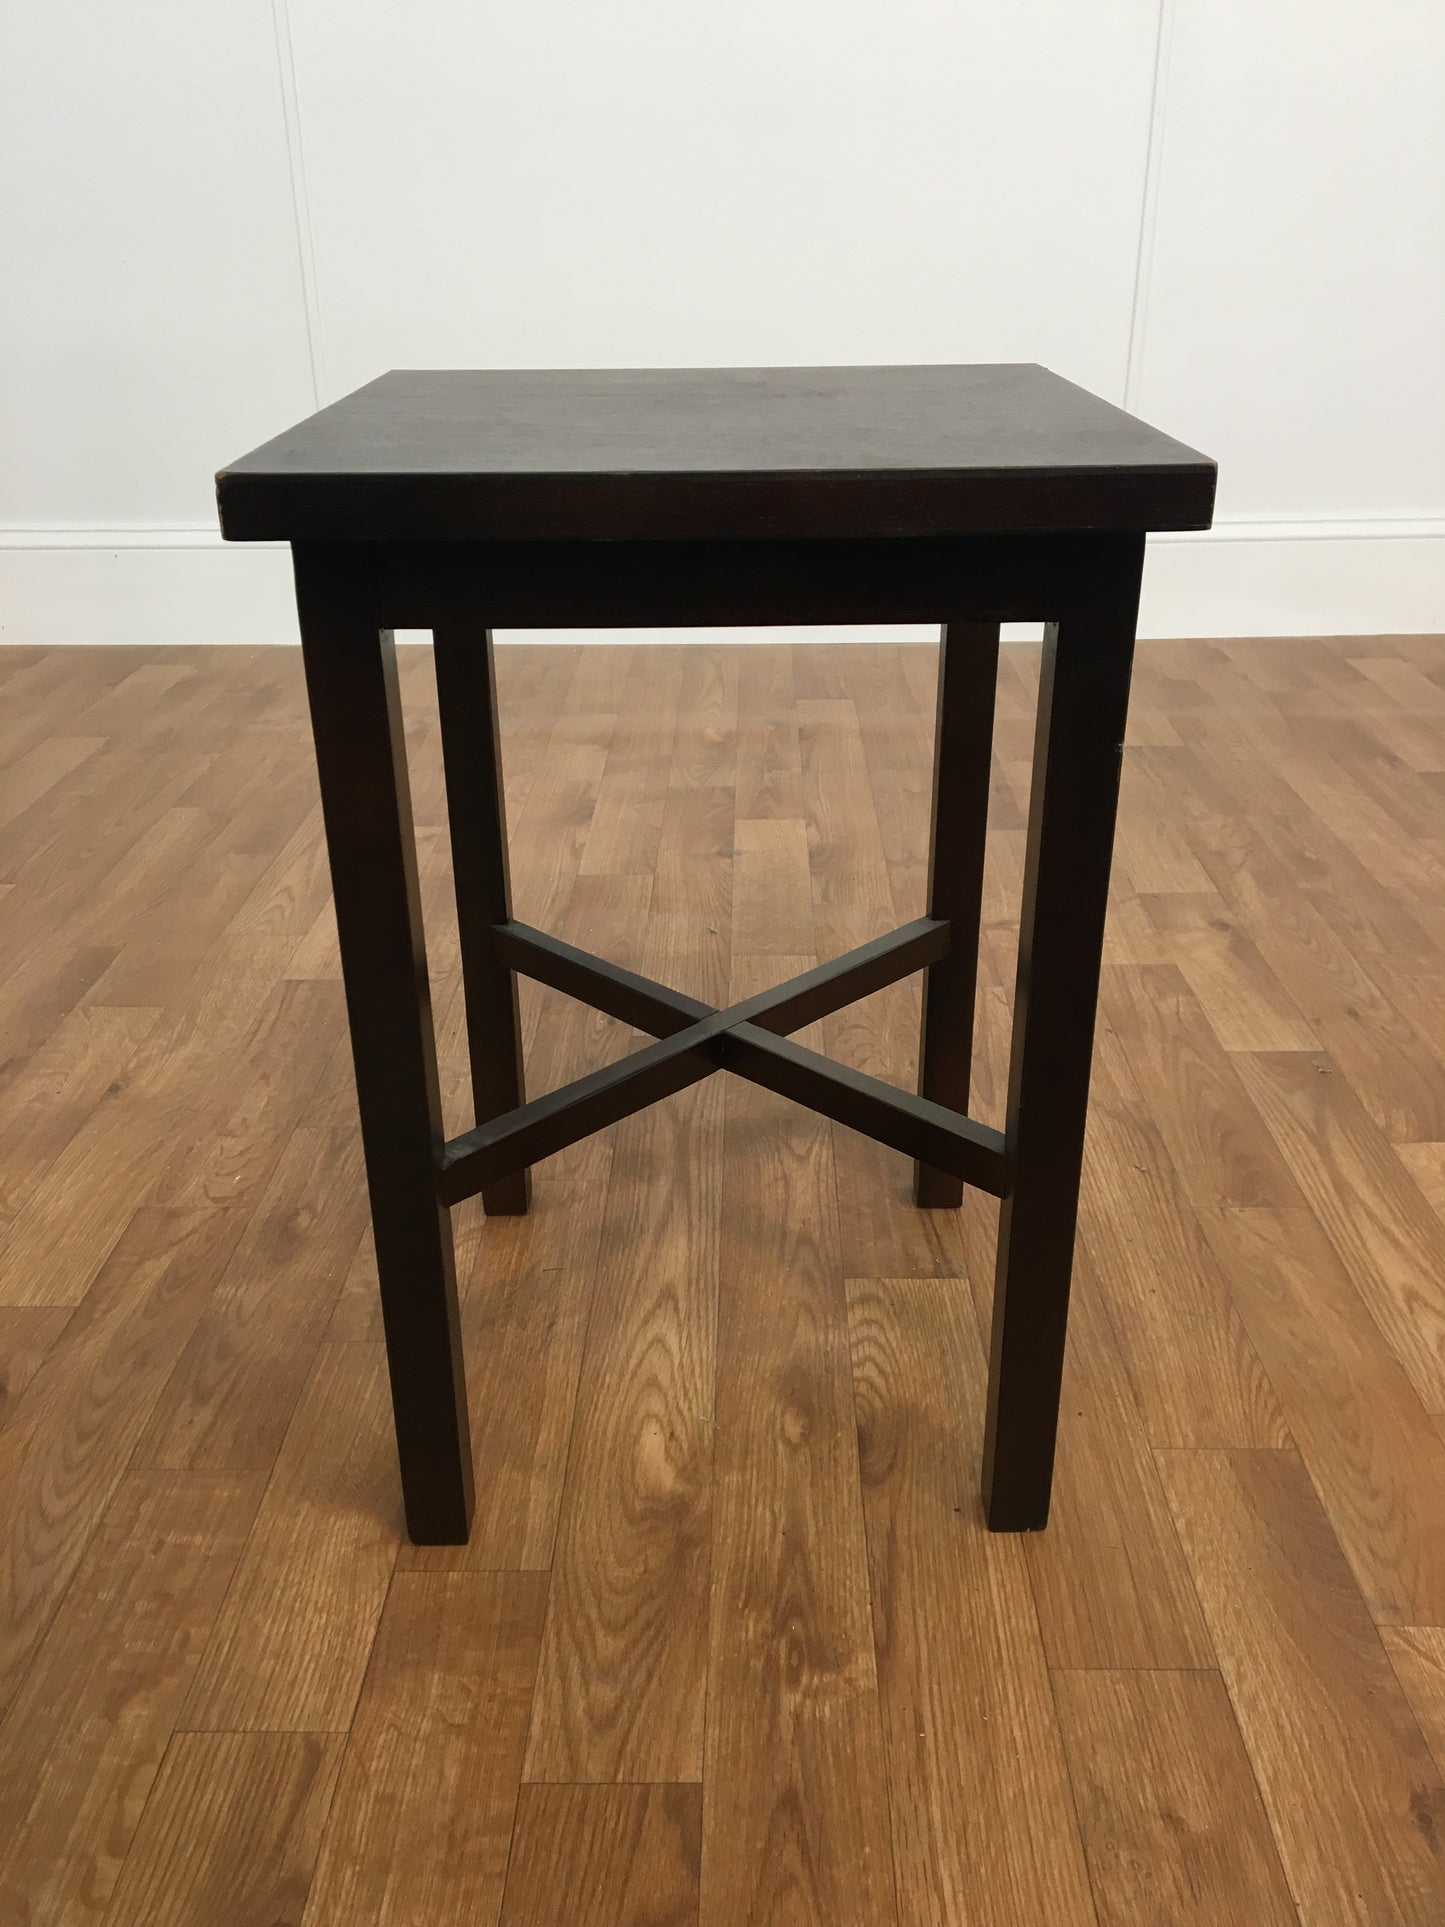 DARK WOOD ACCENT TABLE